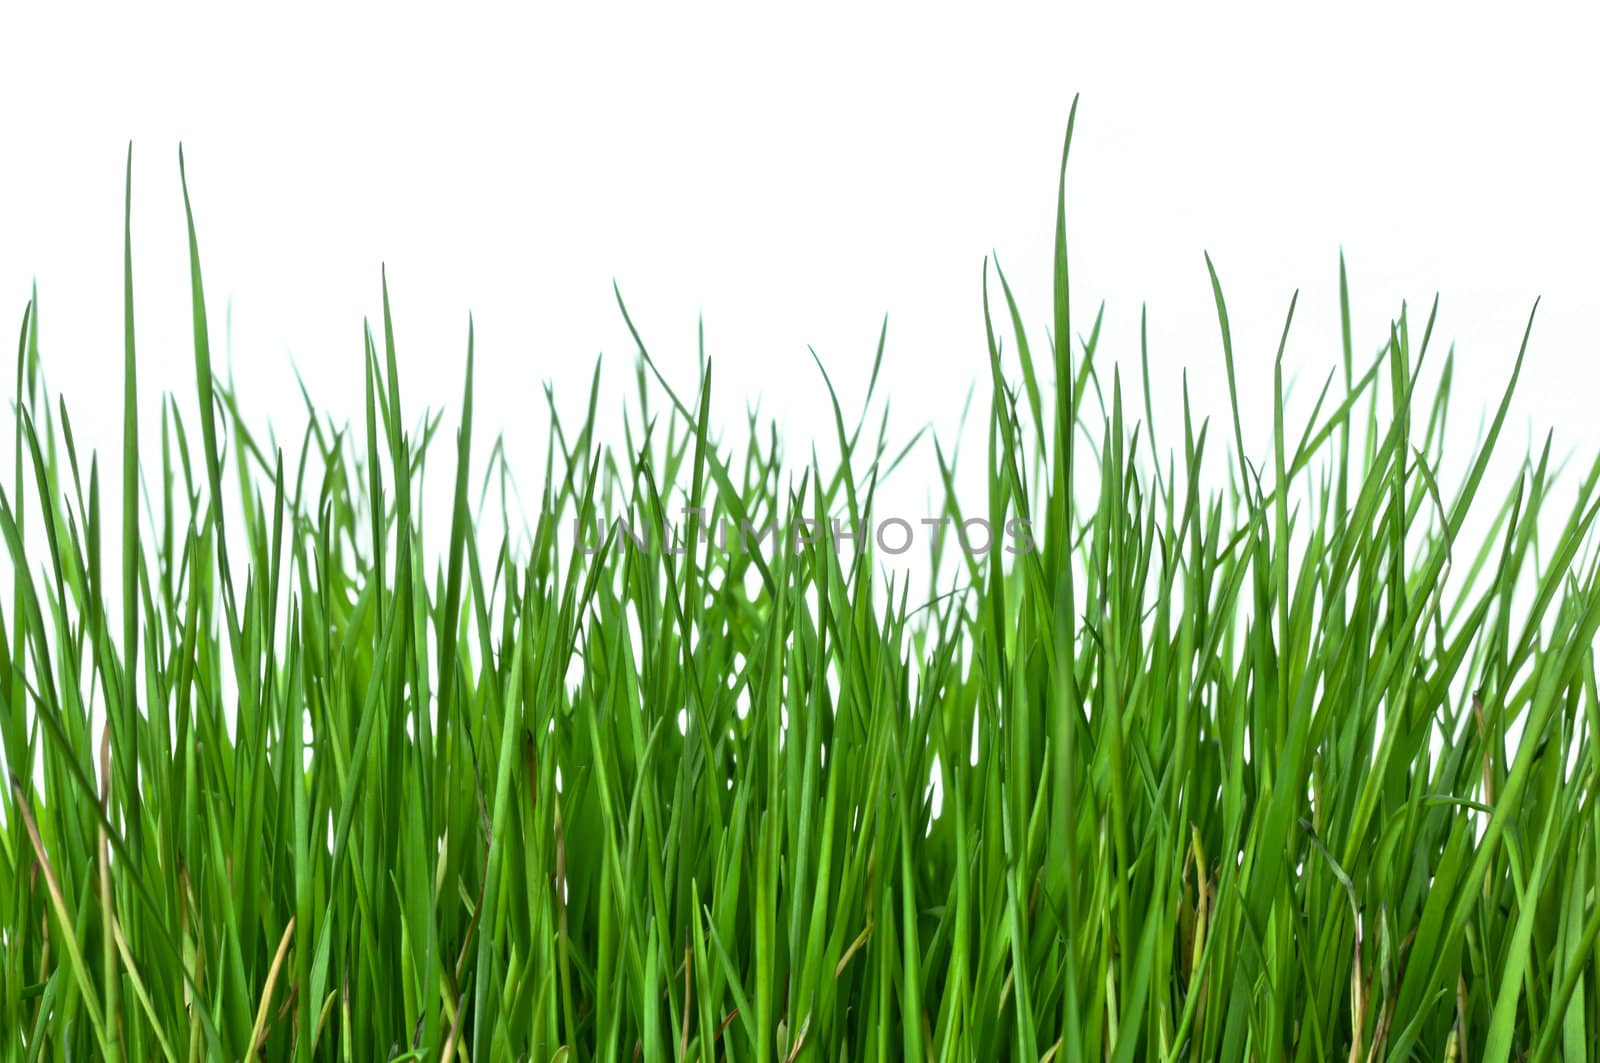 Green and lush grass on white background, horizontal composition